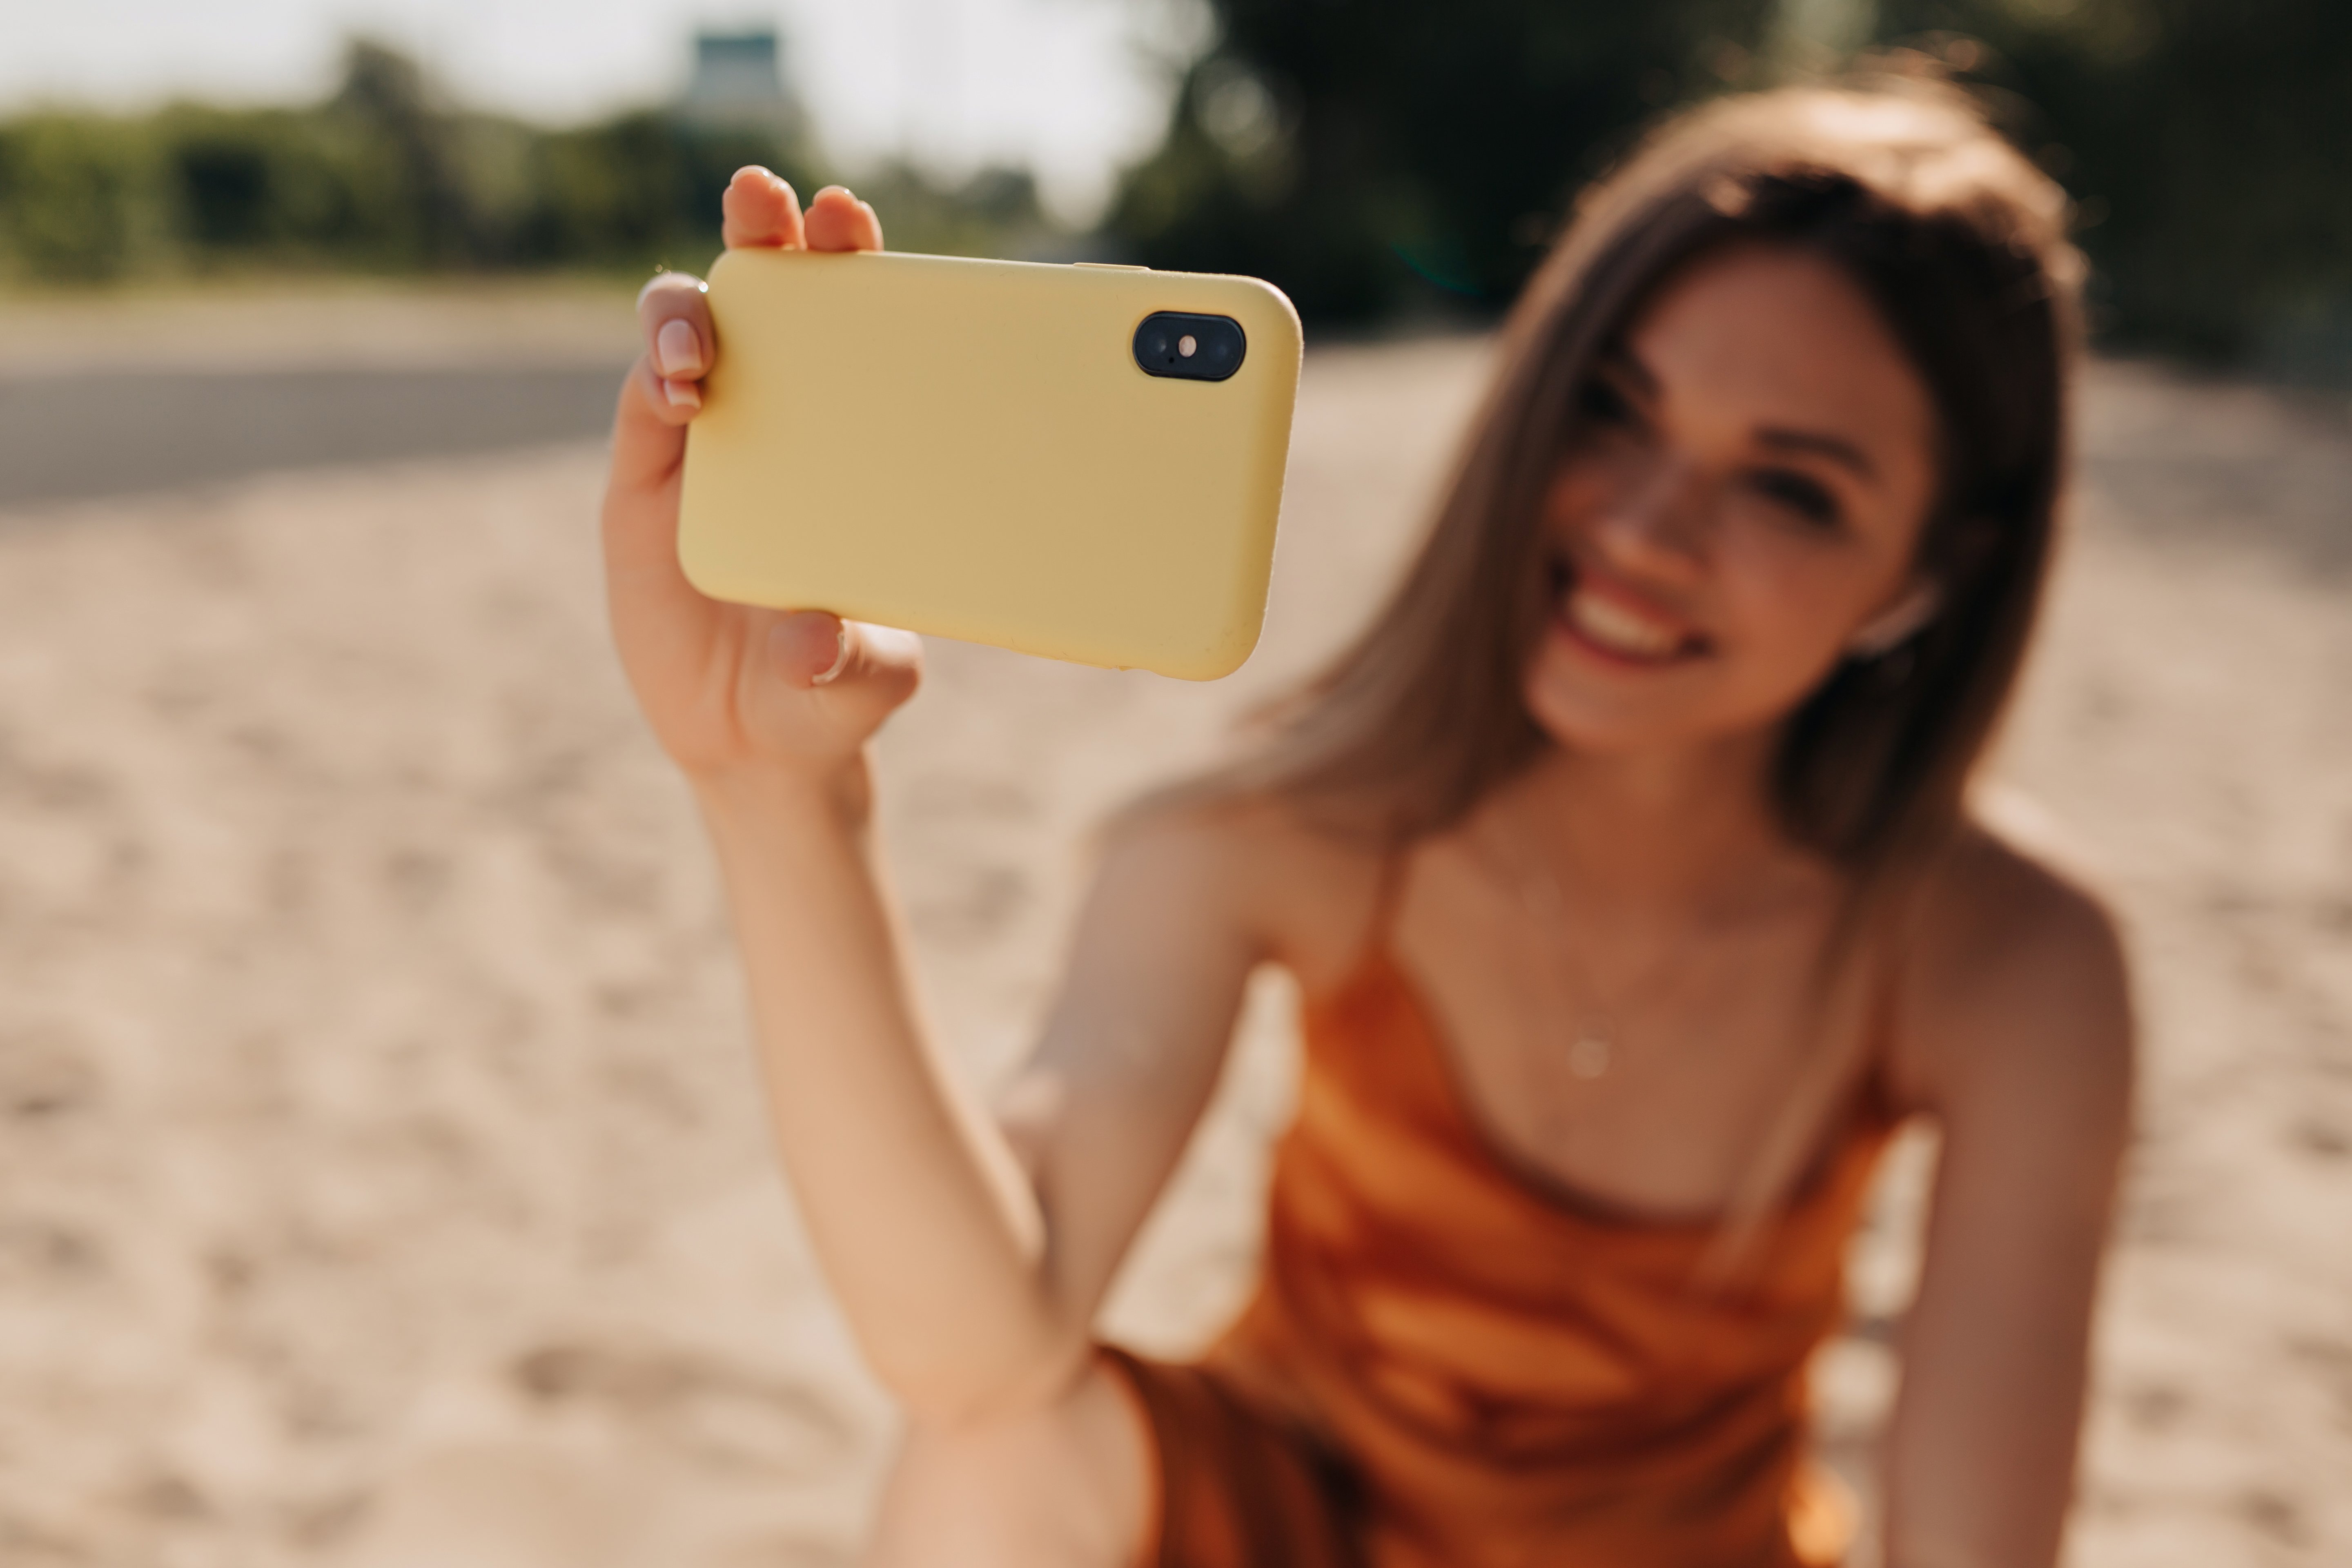 lovely-smiling-girl-with-dark-hairstyle-is-making-selfie-outdoors-sunshine-while-resting-beach-phone-focus-foreground-girl-background-out-focus